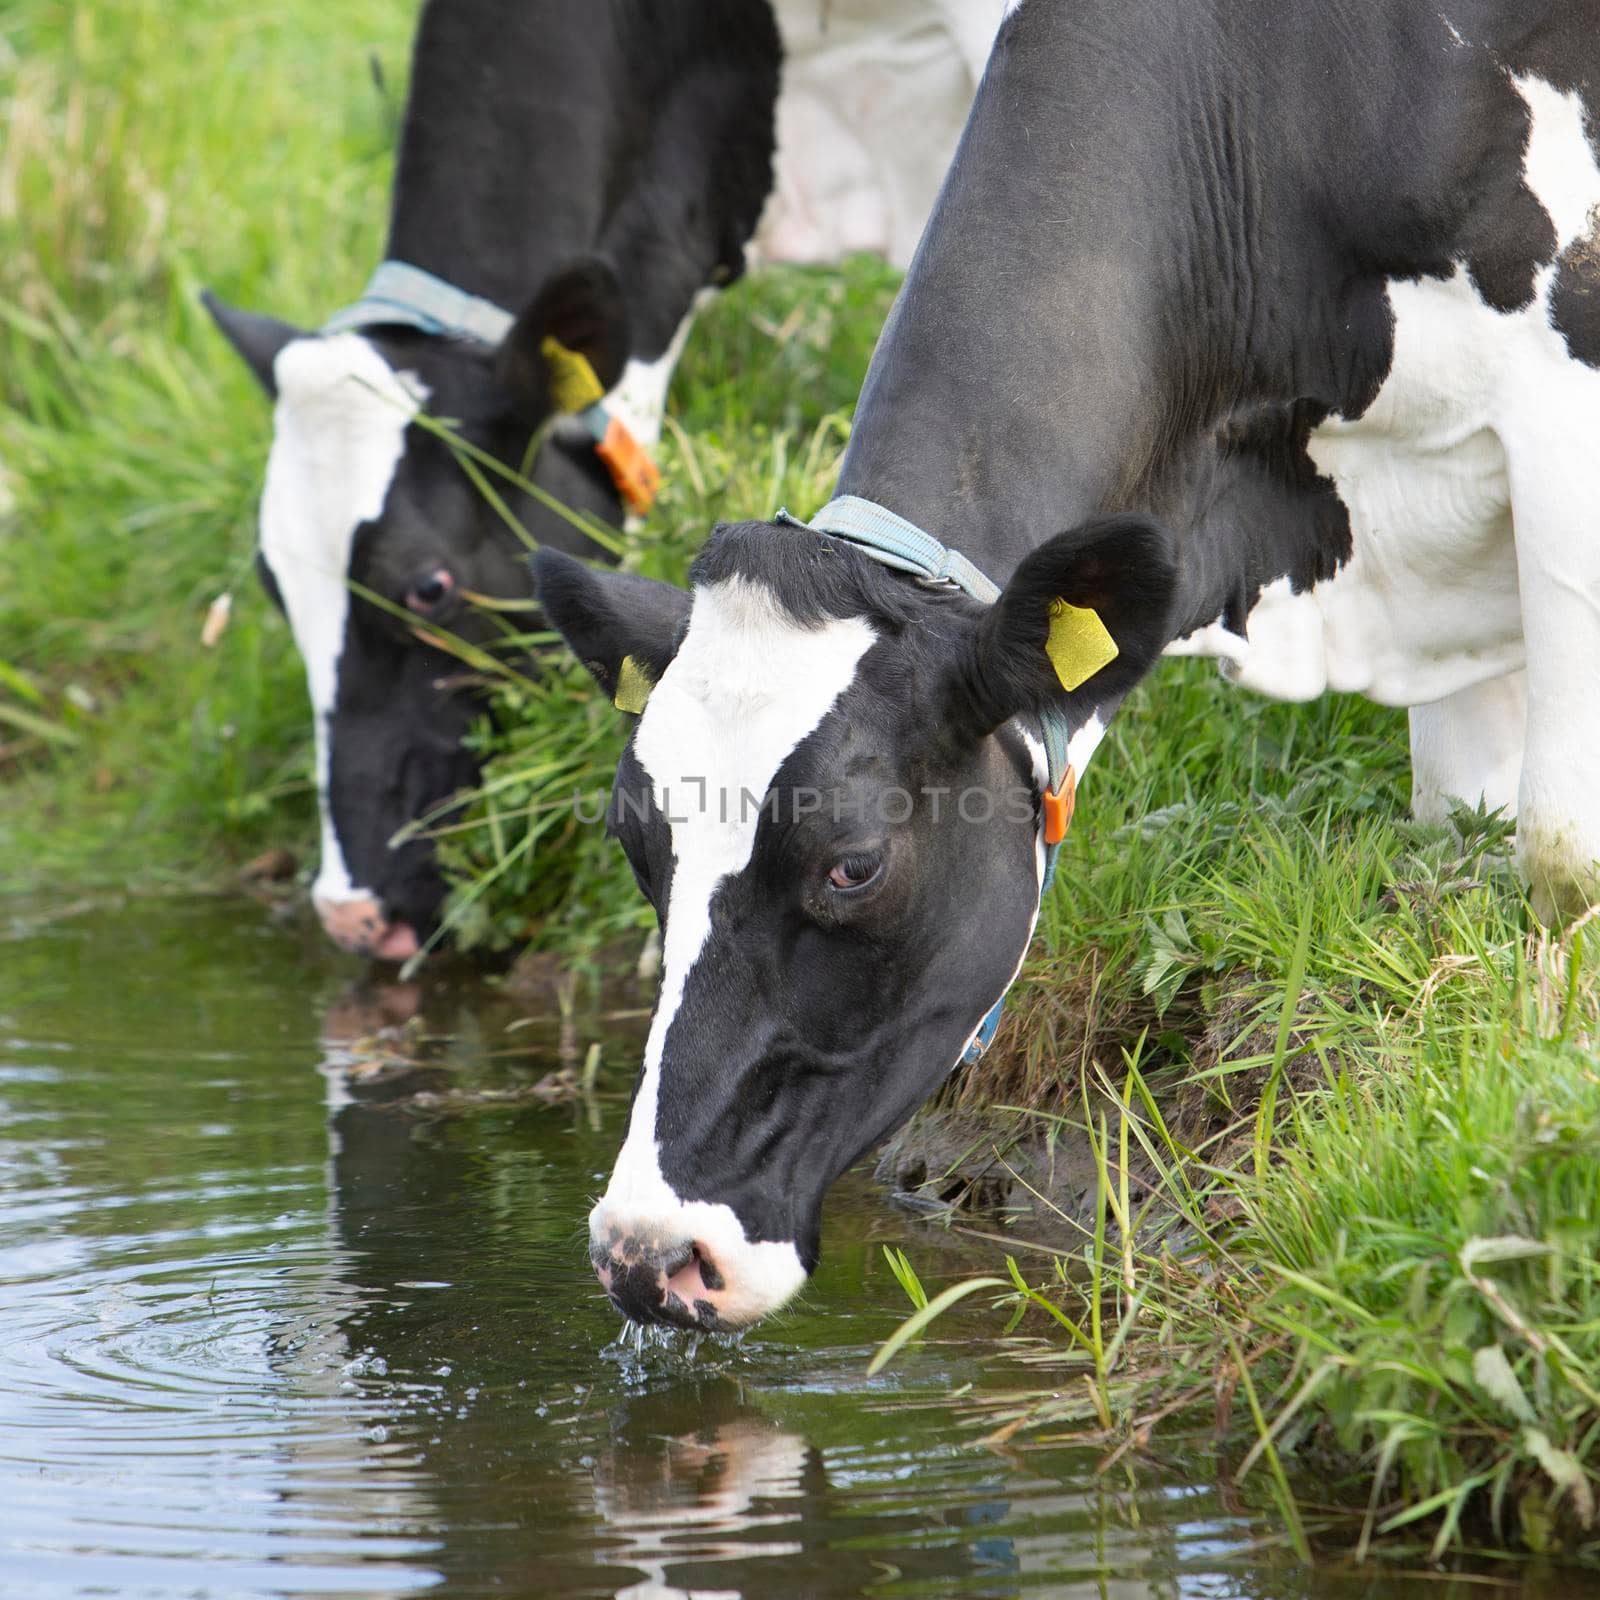 two black and white spotted cows in grassy meadow drink from water of canal in holland